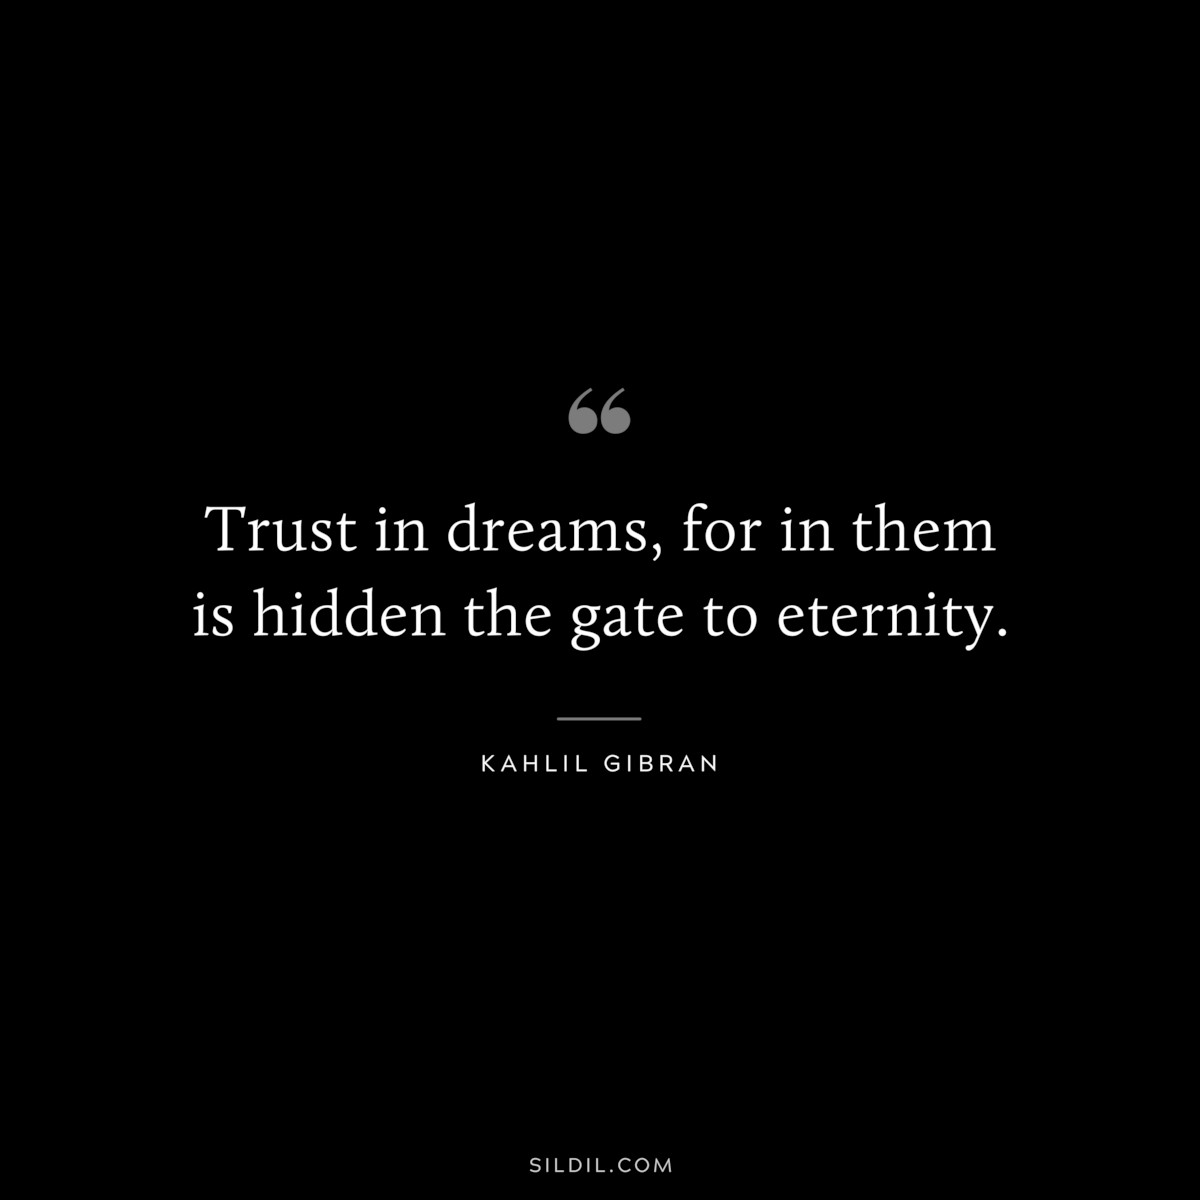 Trust in dreams, for in them is hidden the gate to eternity. ― Kahlil Gibran